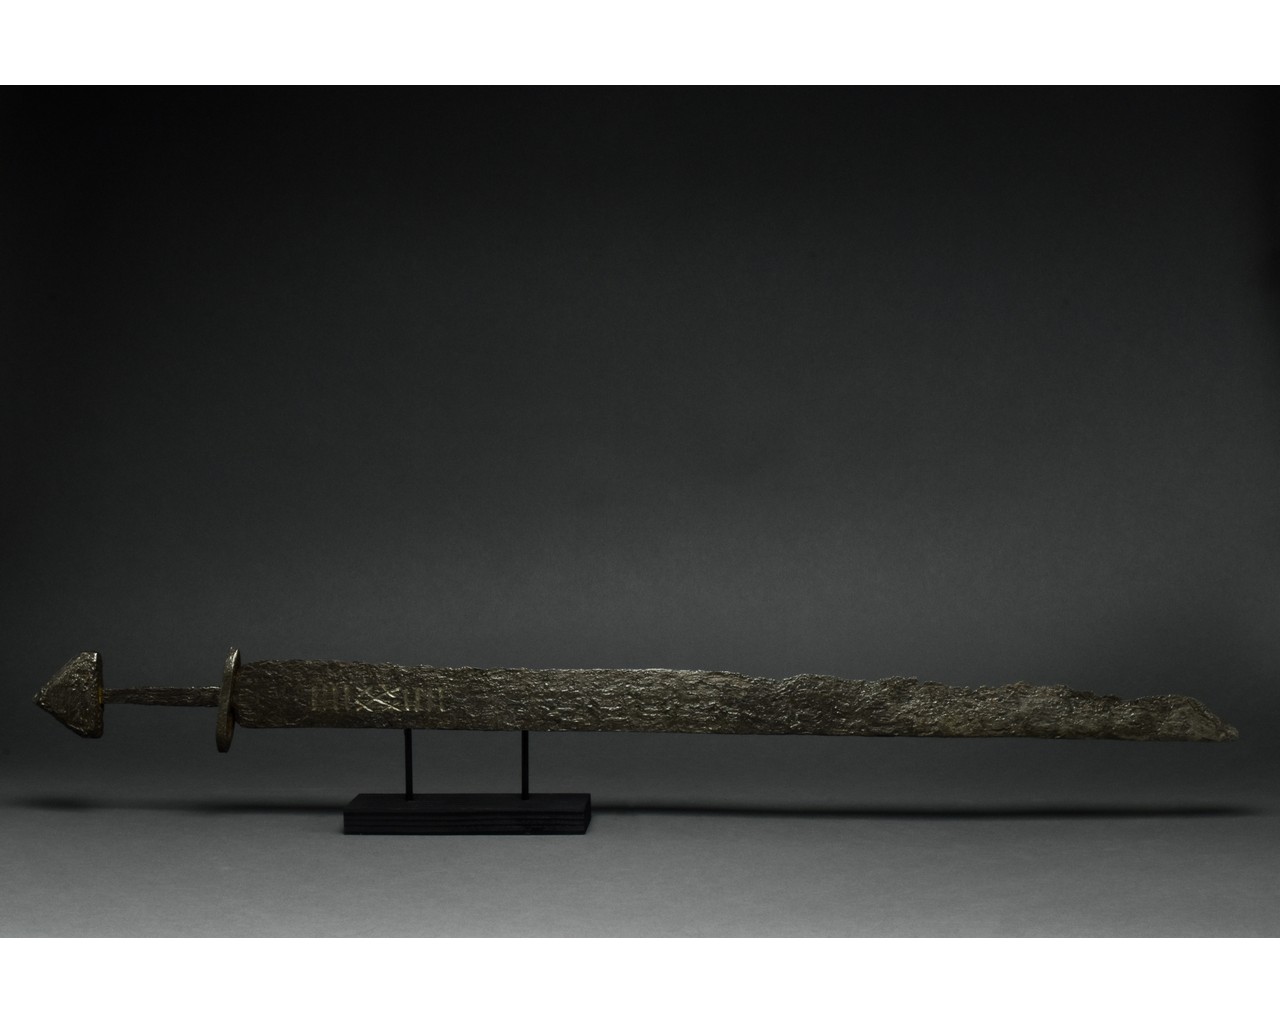 VIKING SINGLE-EDGED SWORD WITH INLAID AND HANDLE - Image 2 of 8